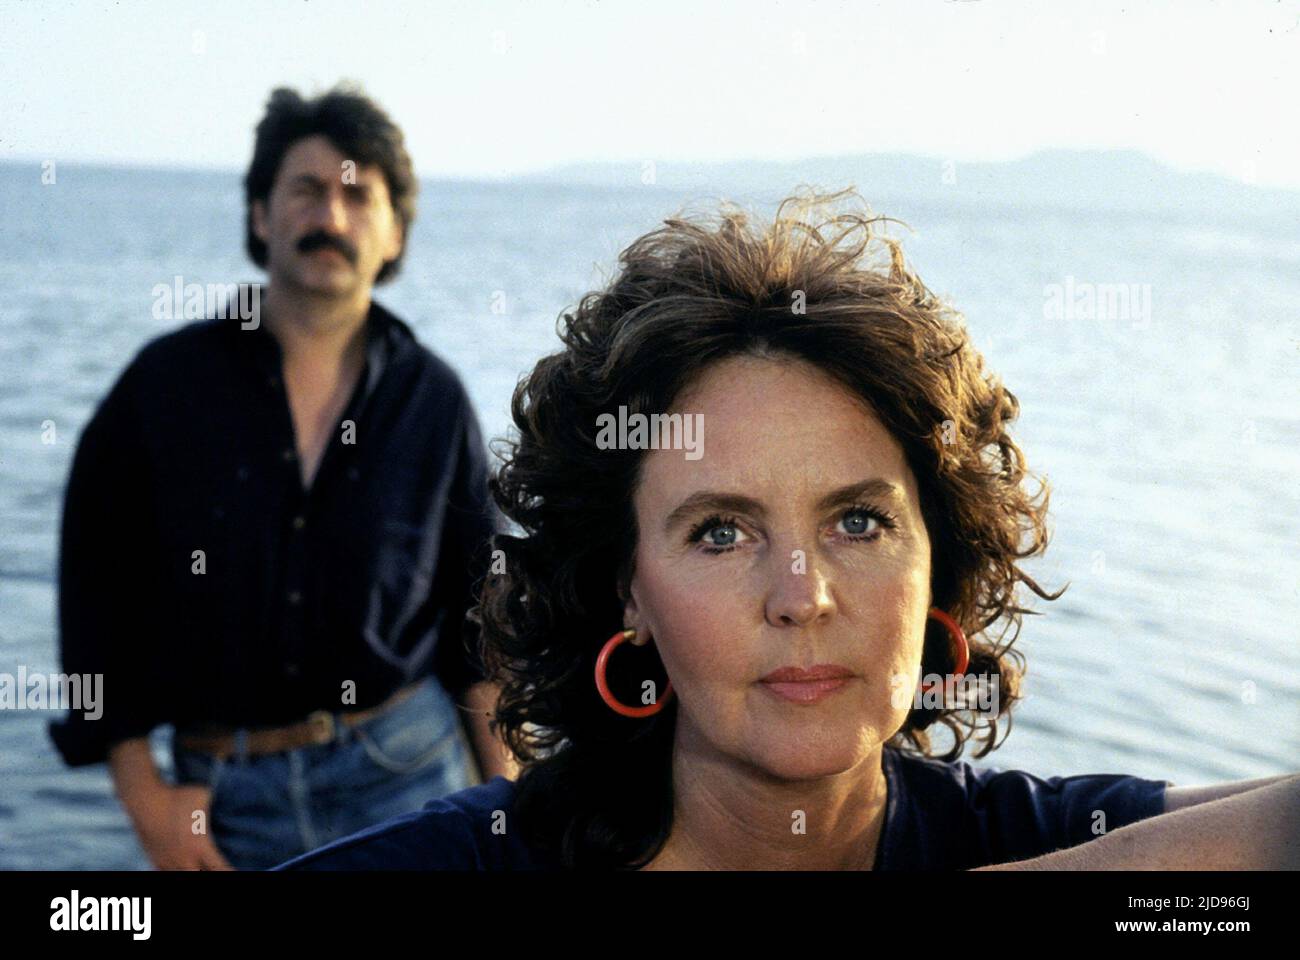 CONTI,COLLINS, SHIRLEY VALENTINE, 1989, Banque D'Images